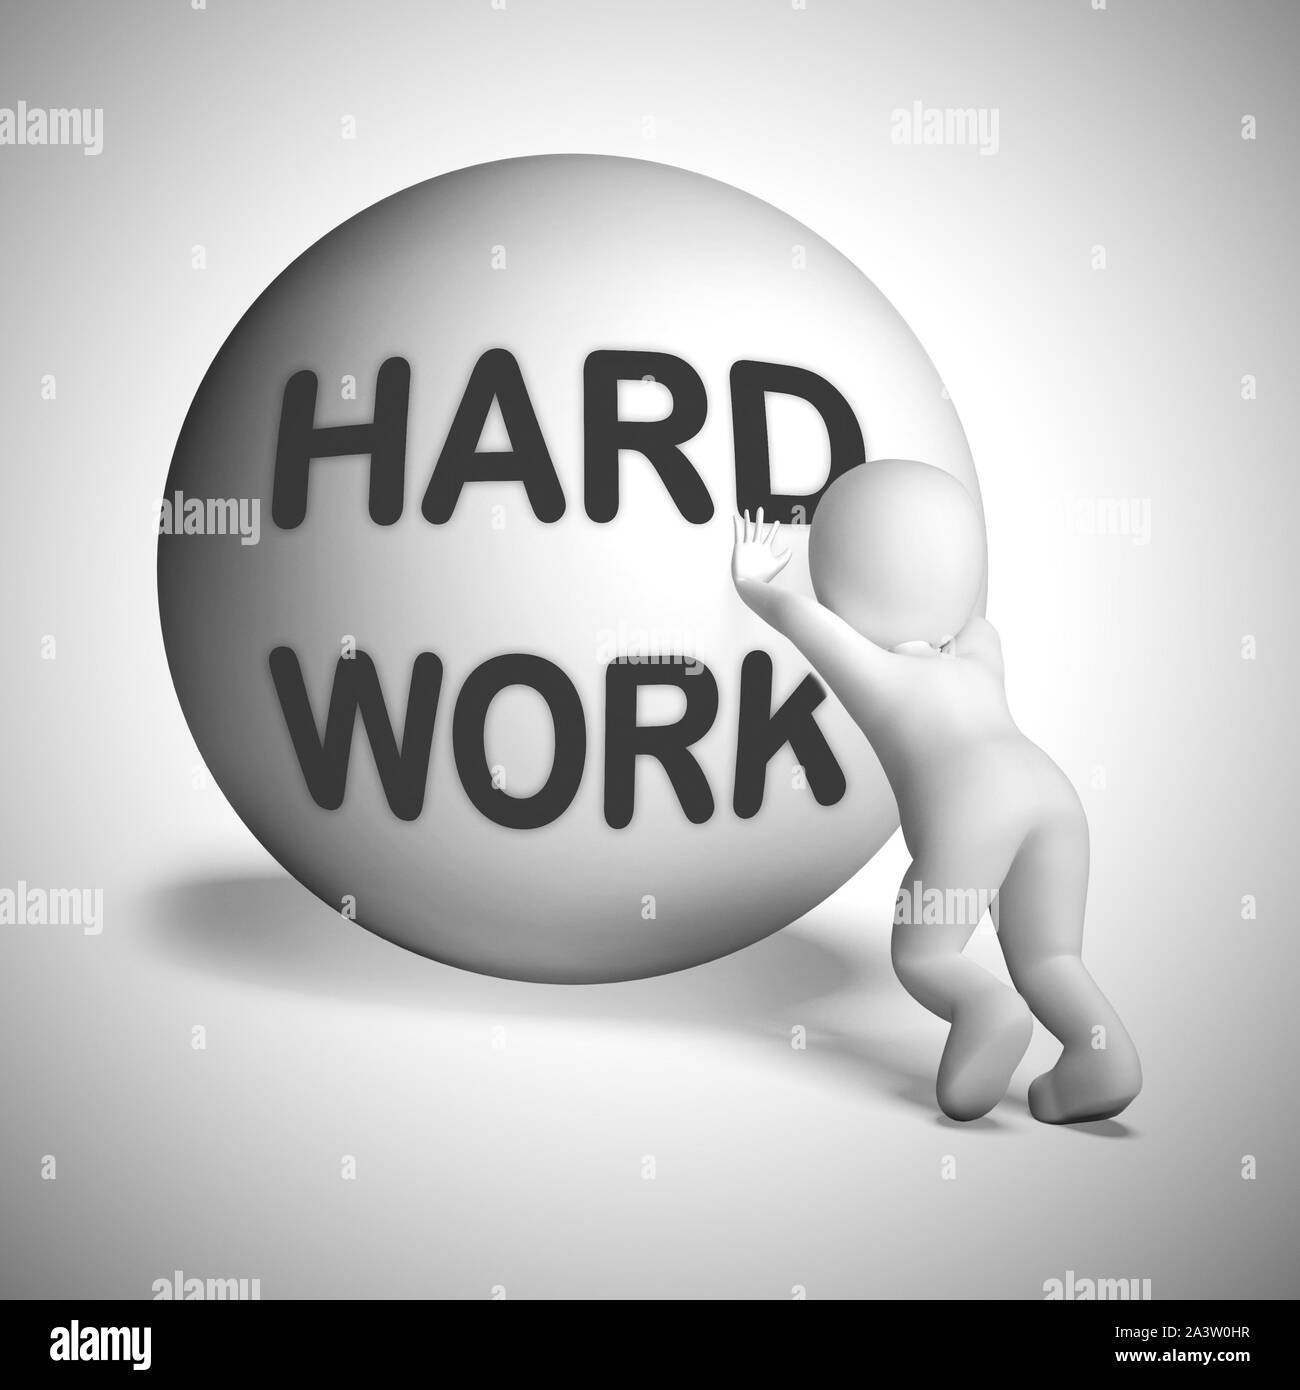 Hard work ball rolled uphill means perseverance and a tough job. Physical exertion or manual labour - 3d illustration Stock Photo